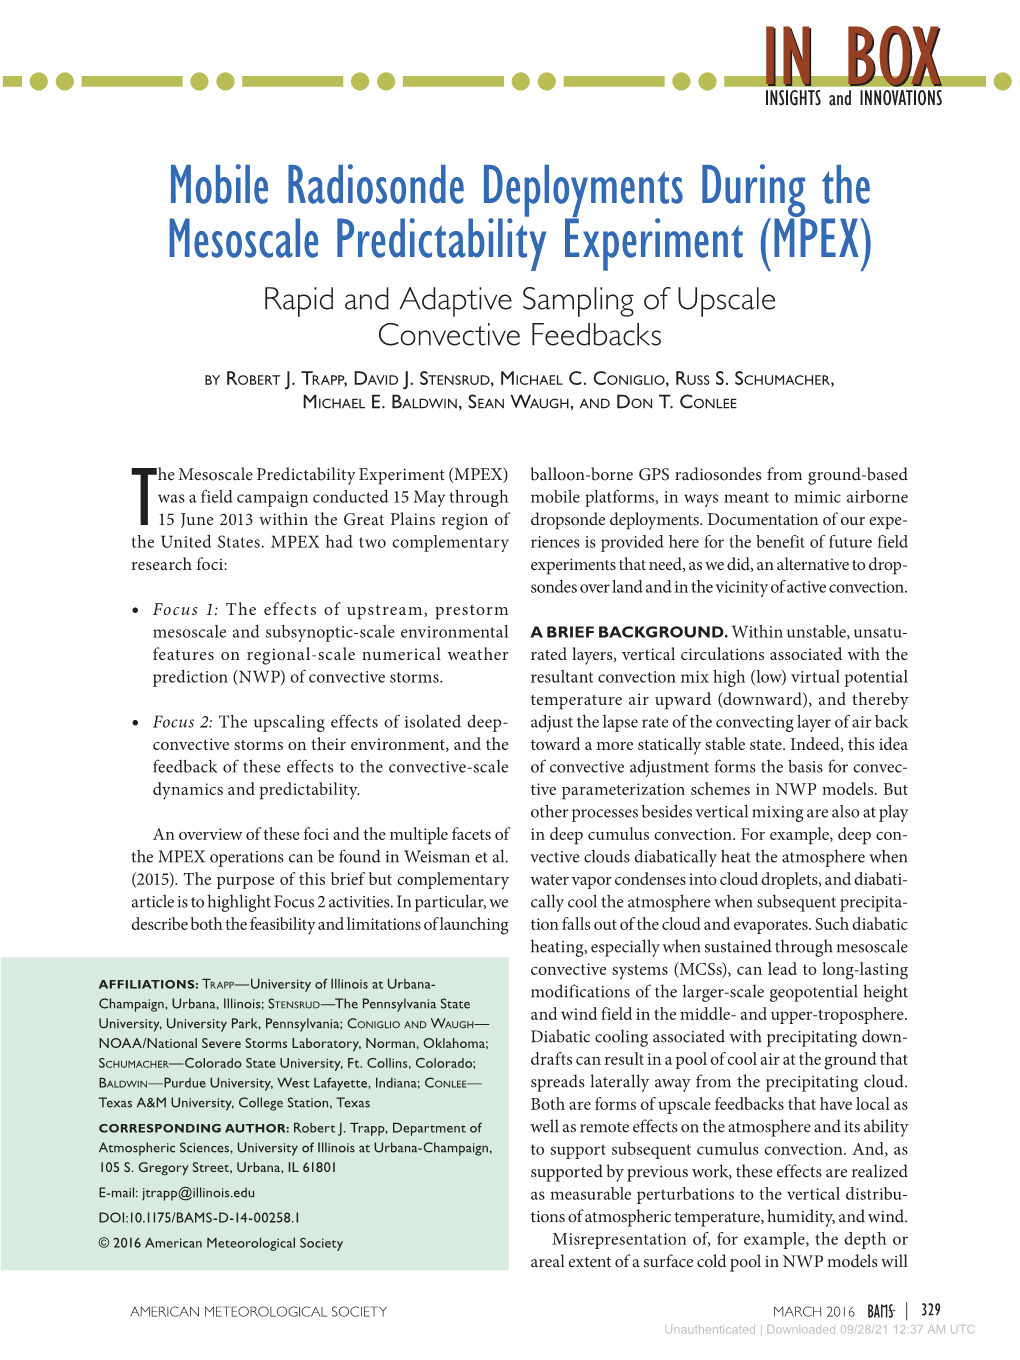 Mobile Radiosonde Deployments During the Mesoscale Predictability Experiment (MPEX) Rapid and Adaptive Sampling of Upscale Convective Feedbacks